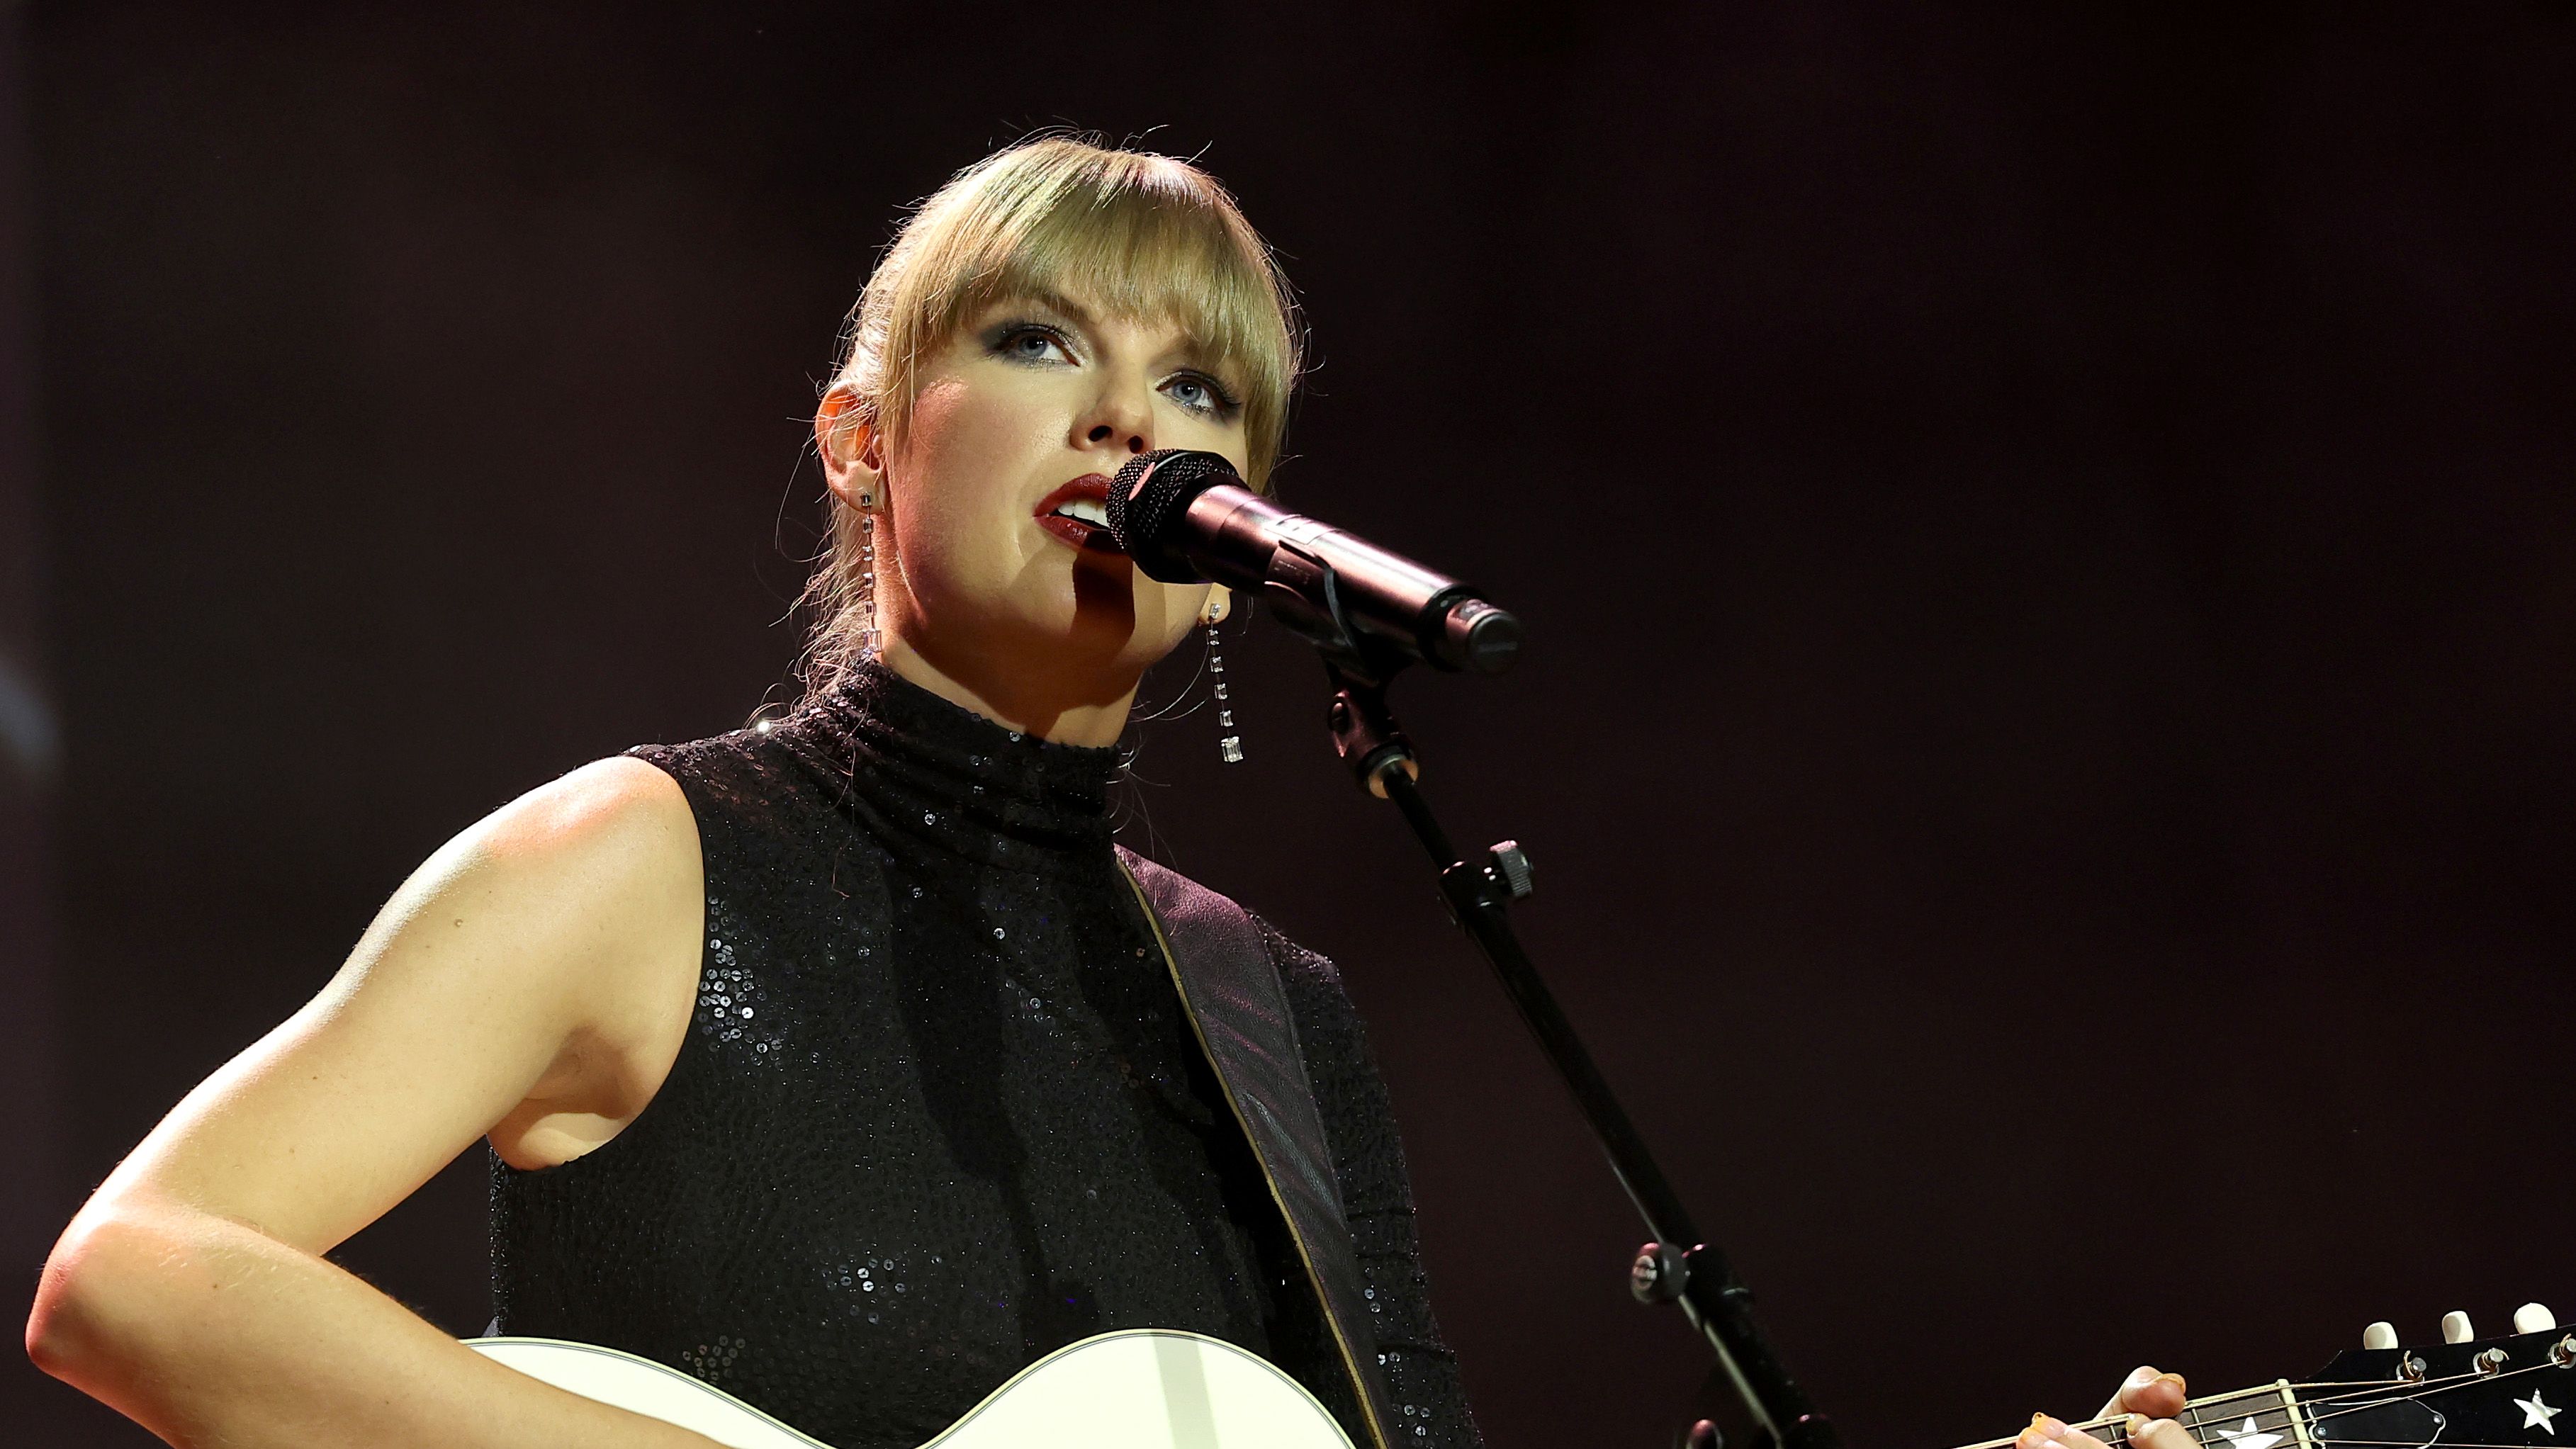 Taylor Swift Sang Her Whole Setlist on the Treadmill Every Day